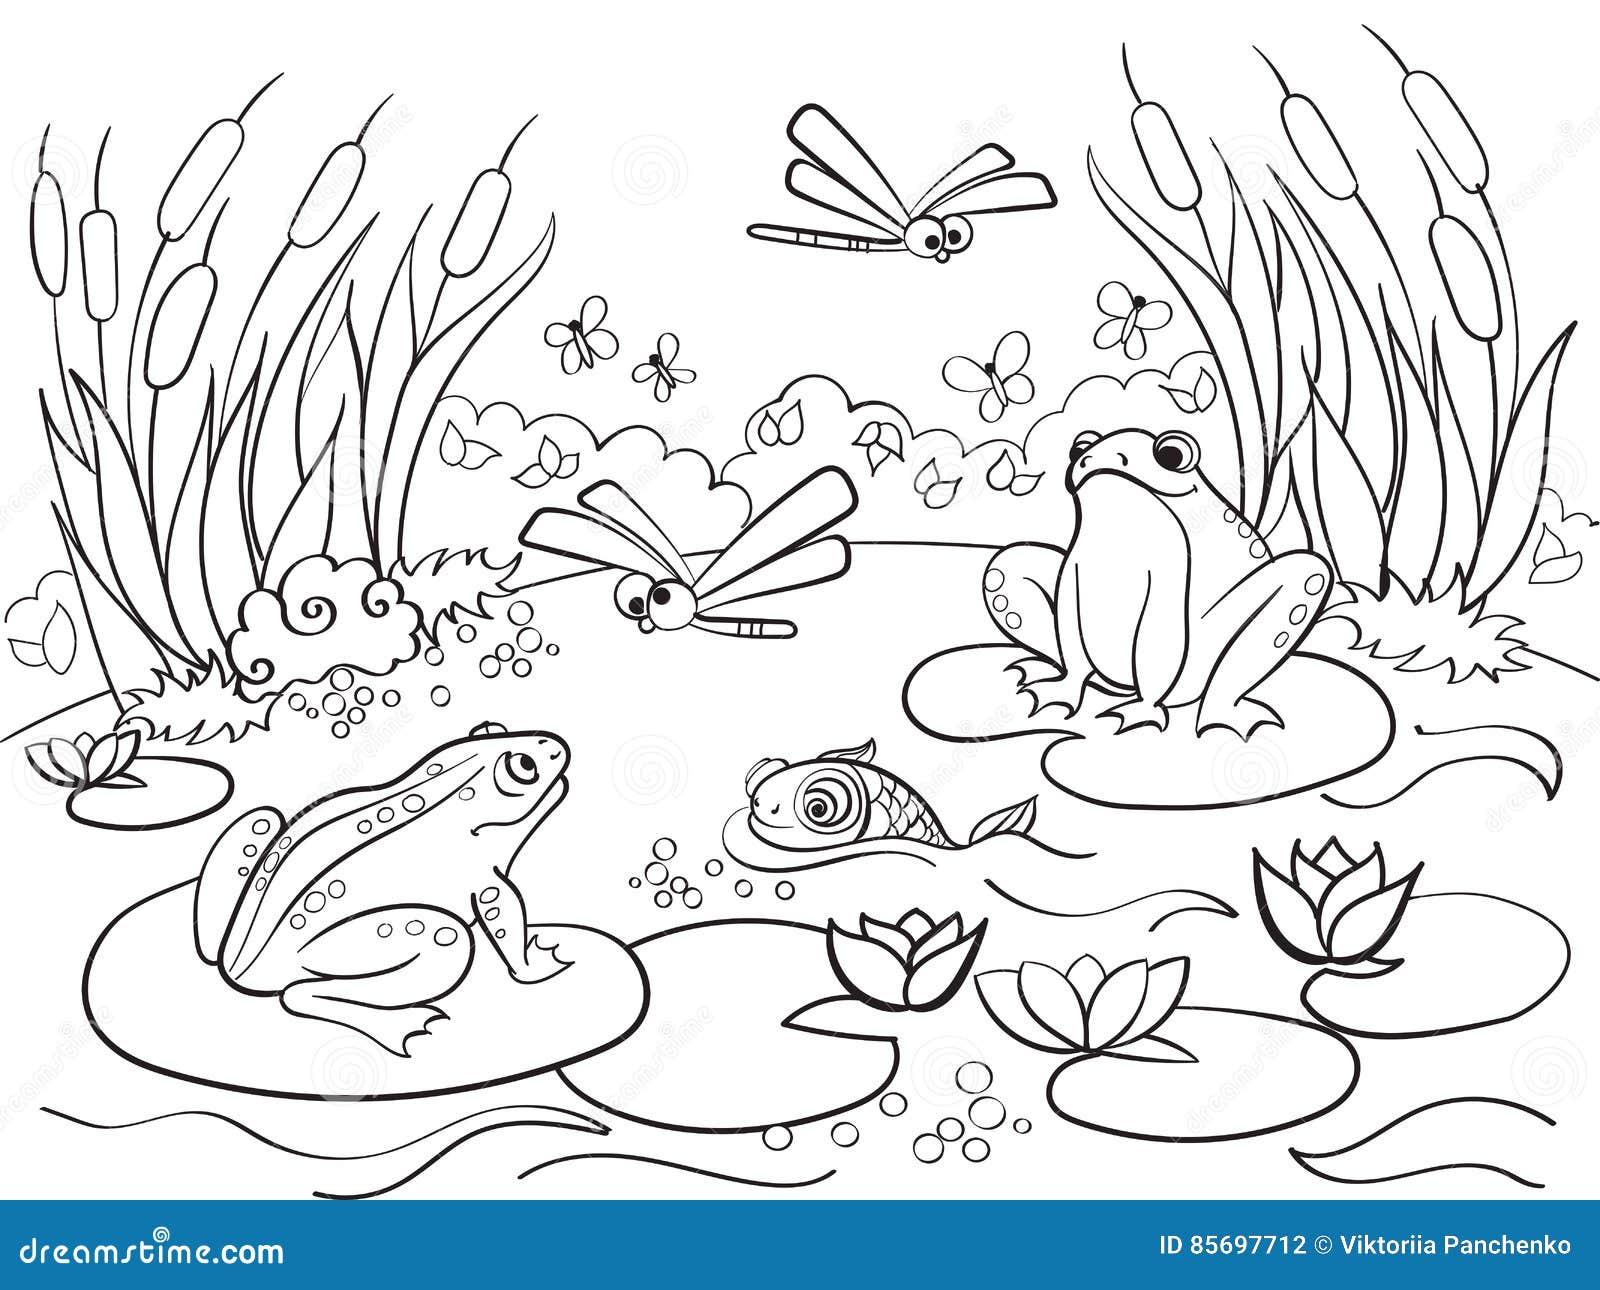 Wetland Landscape with Animals Coloring Vector for Adults Stock ...